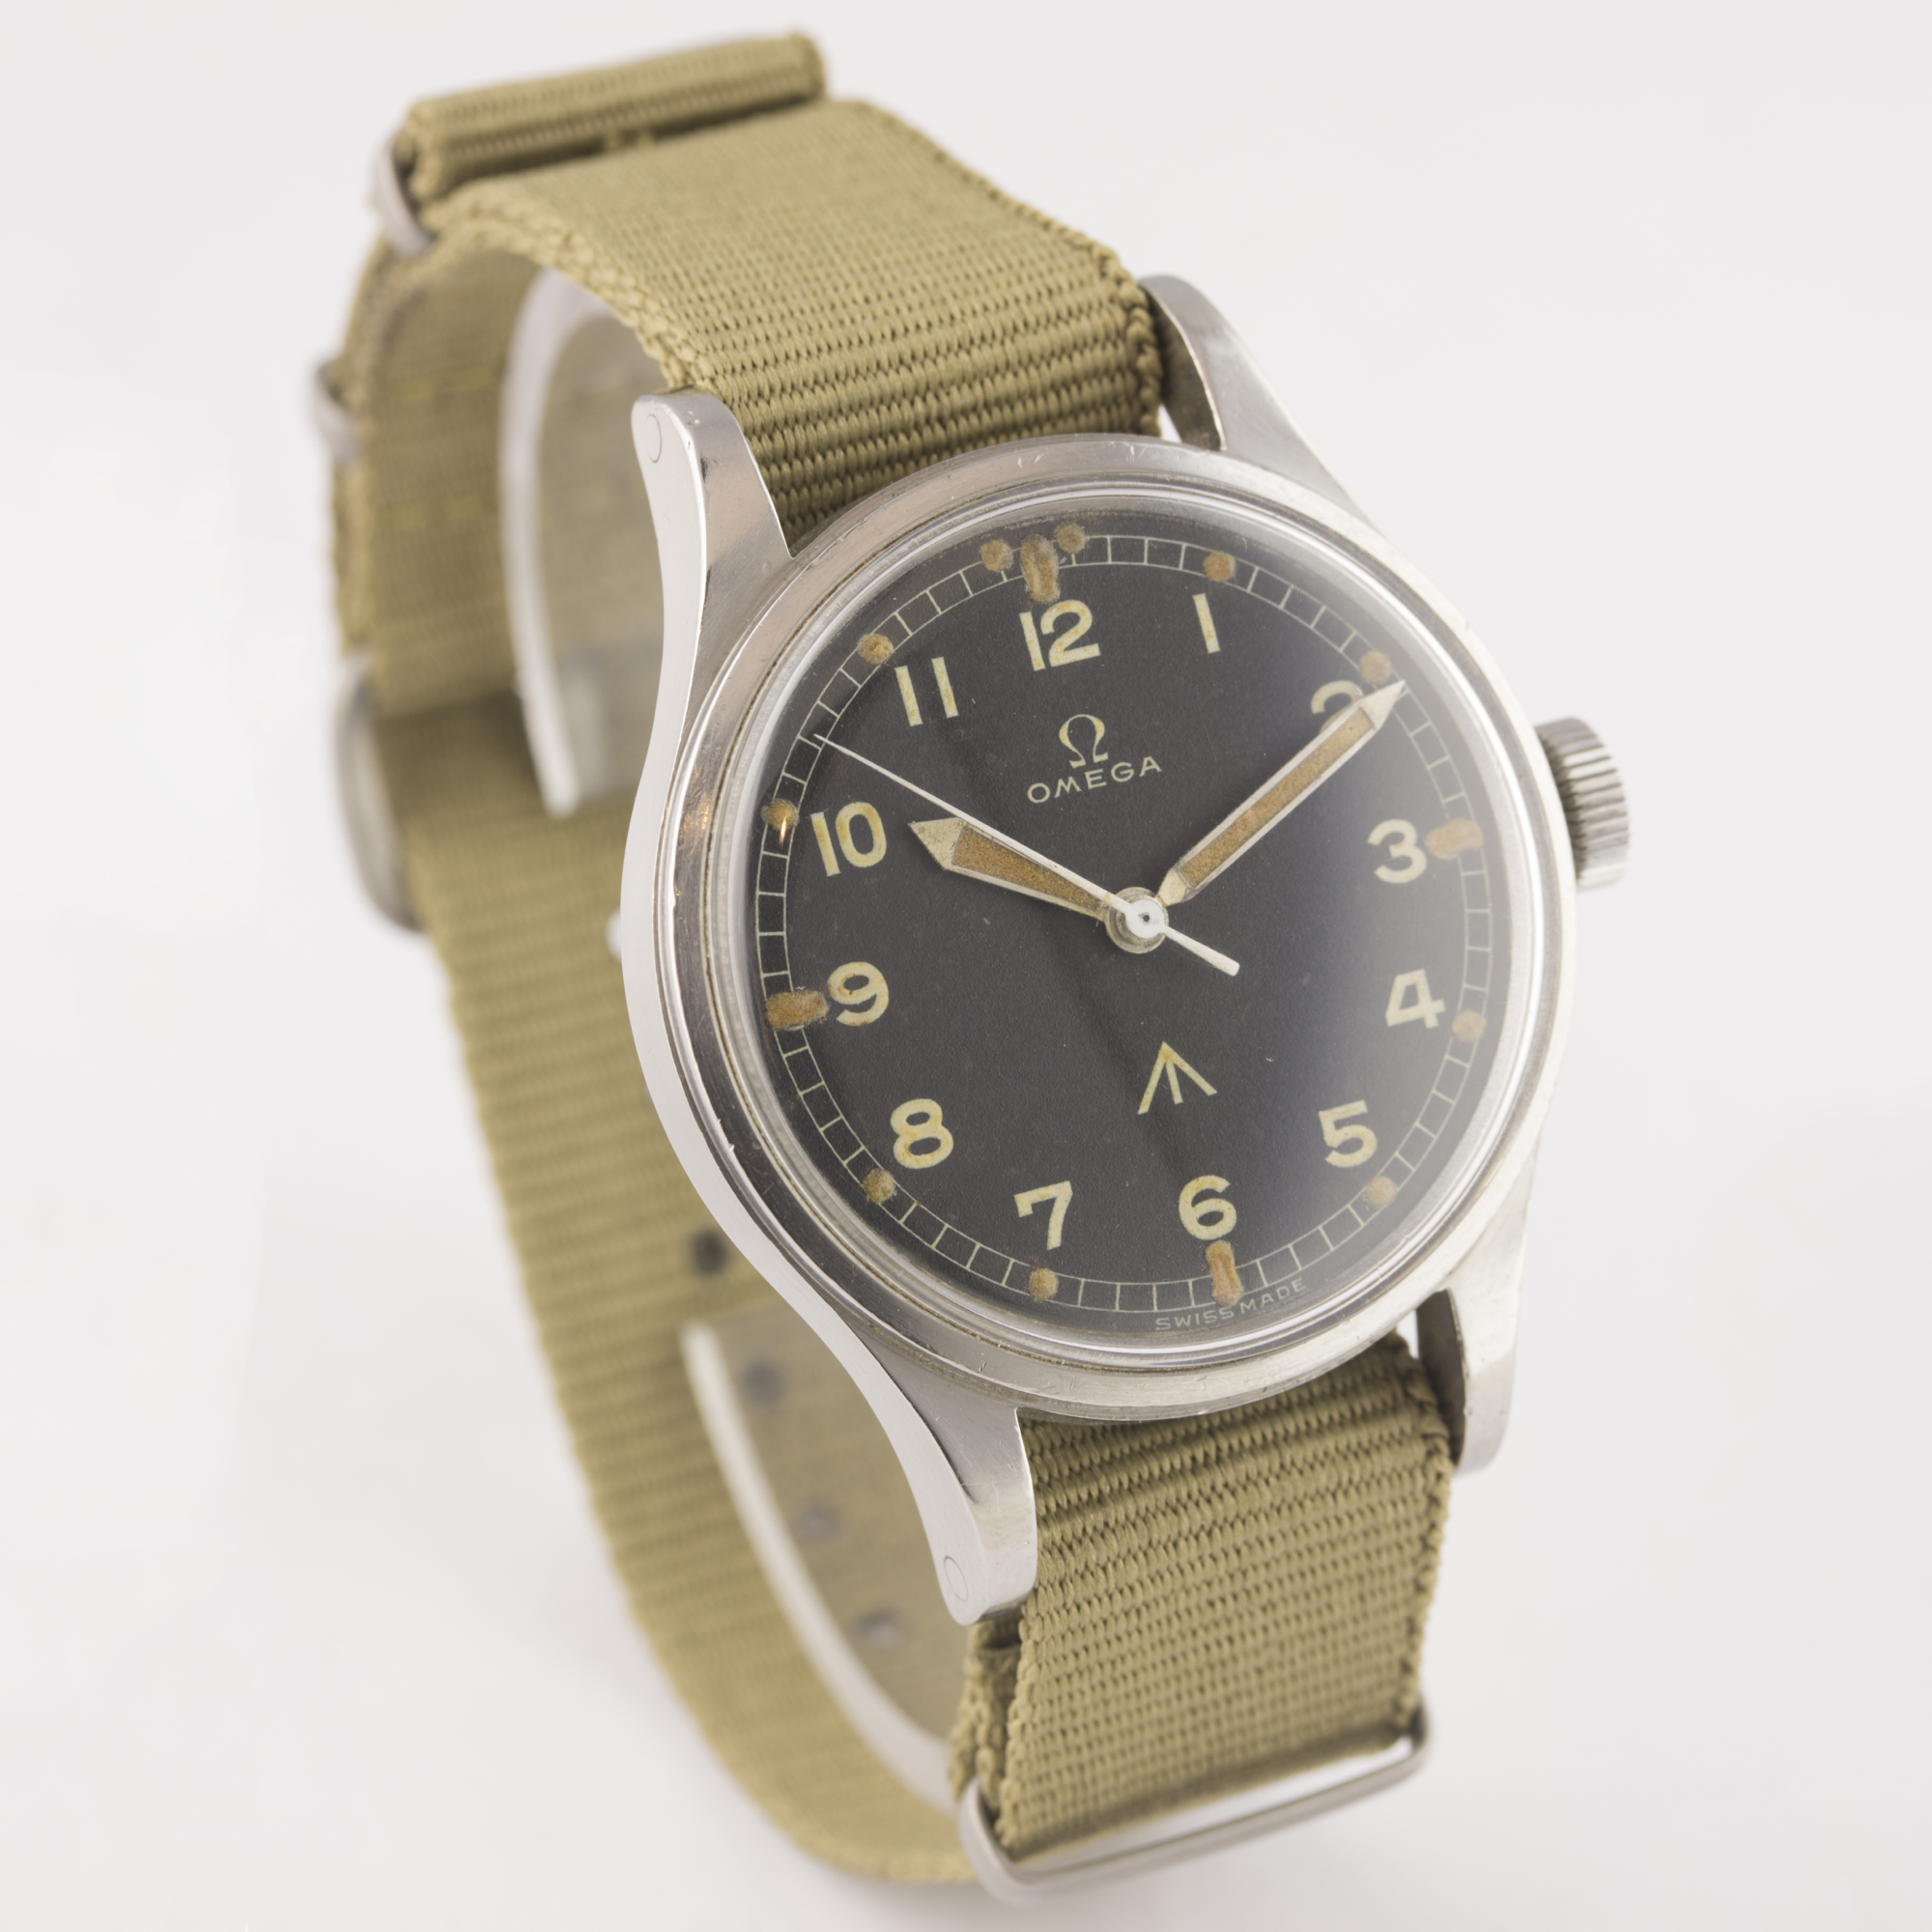 A VERY RARE GENTLEMAN'S STAINLESS STEEL BRITISH MILITARY OMEGA RAF "THIN ARROW" PILOTS WRIST WATCH - Image 6 of 9